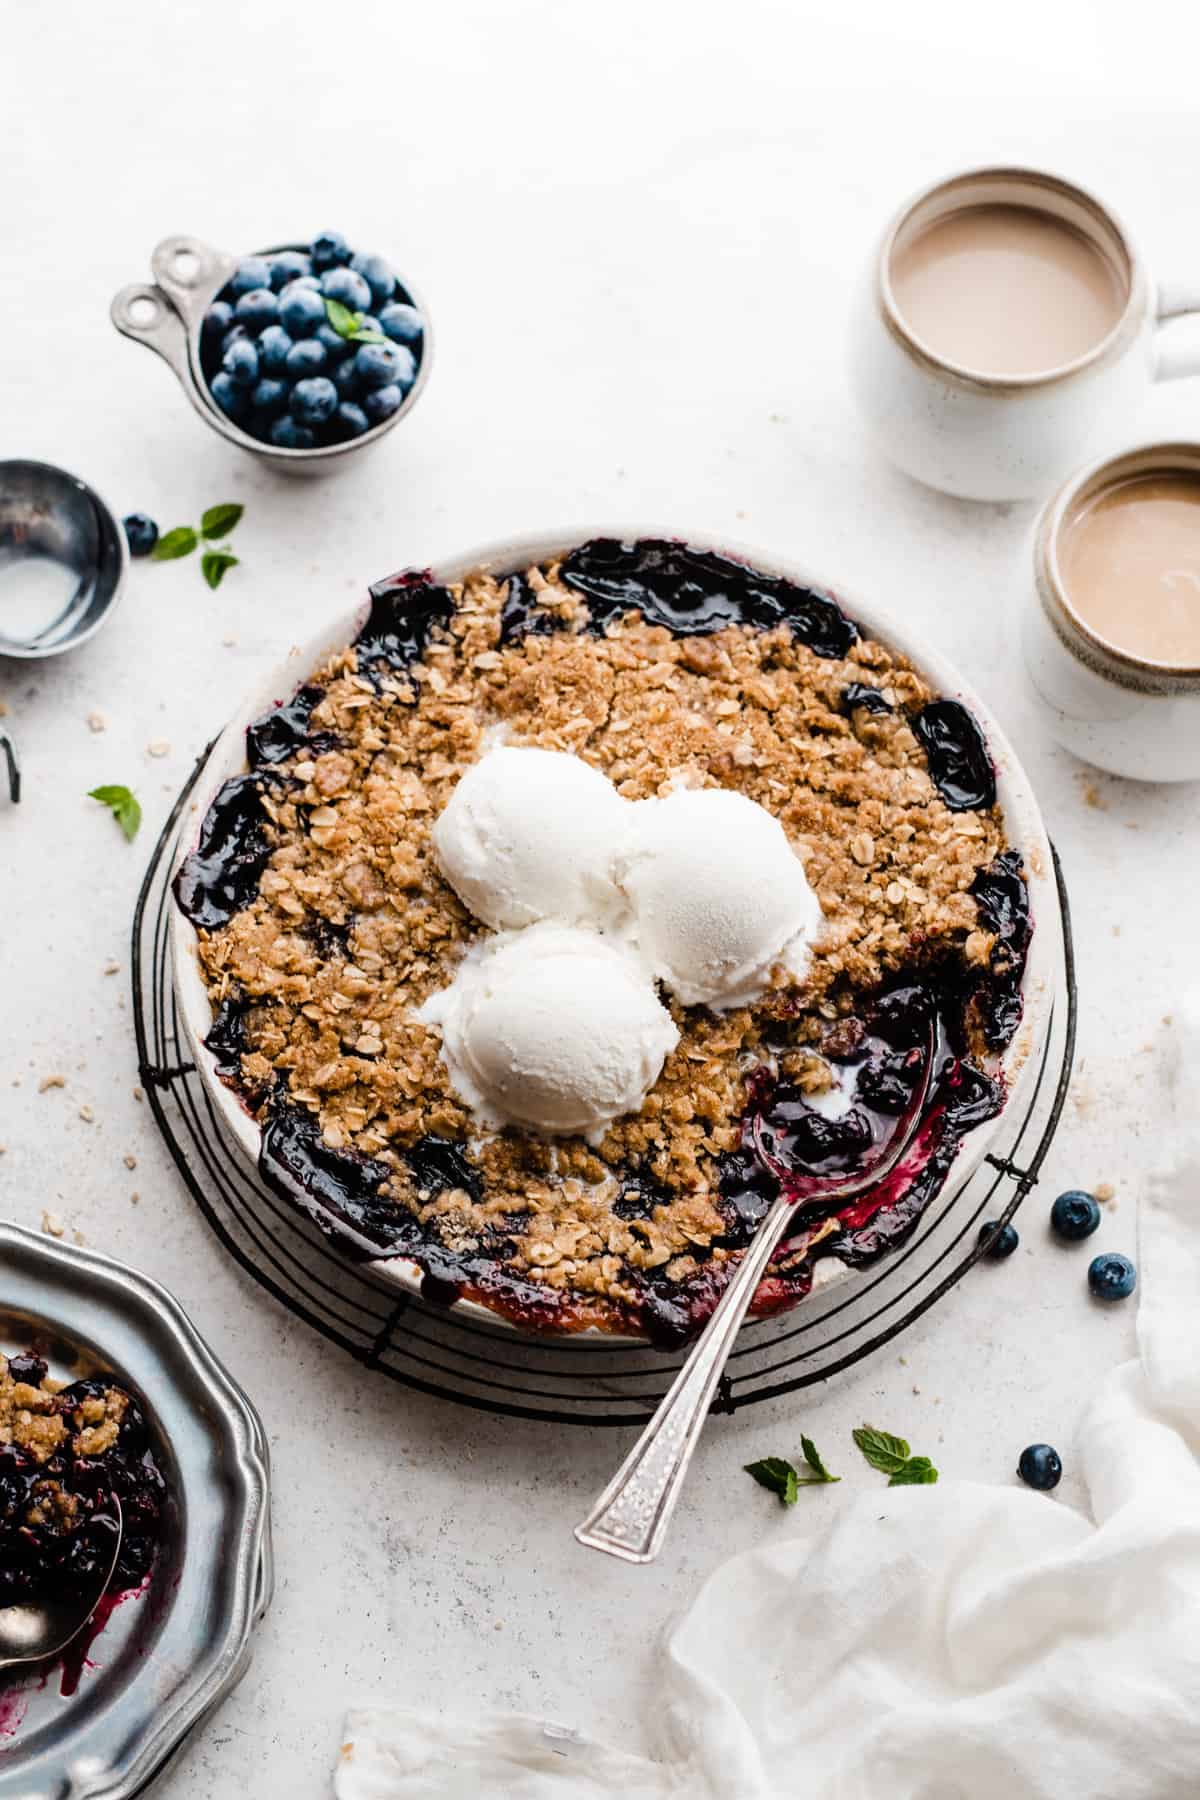 A round dish of blueberry crisp topped with ice cream, with a serving spoon digging in.